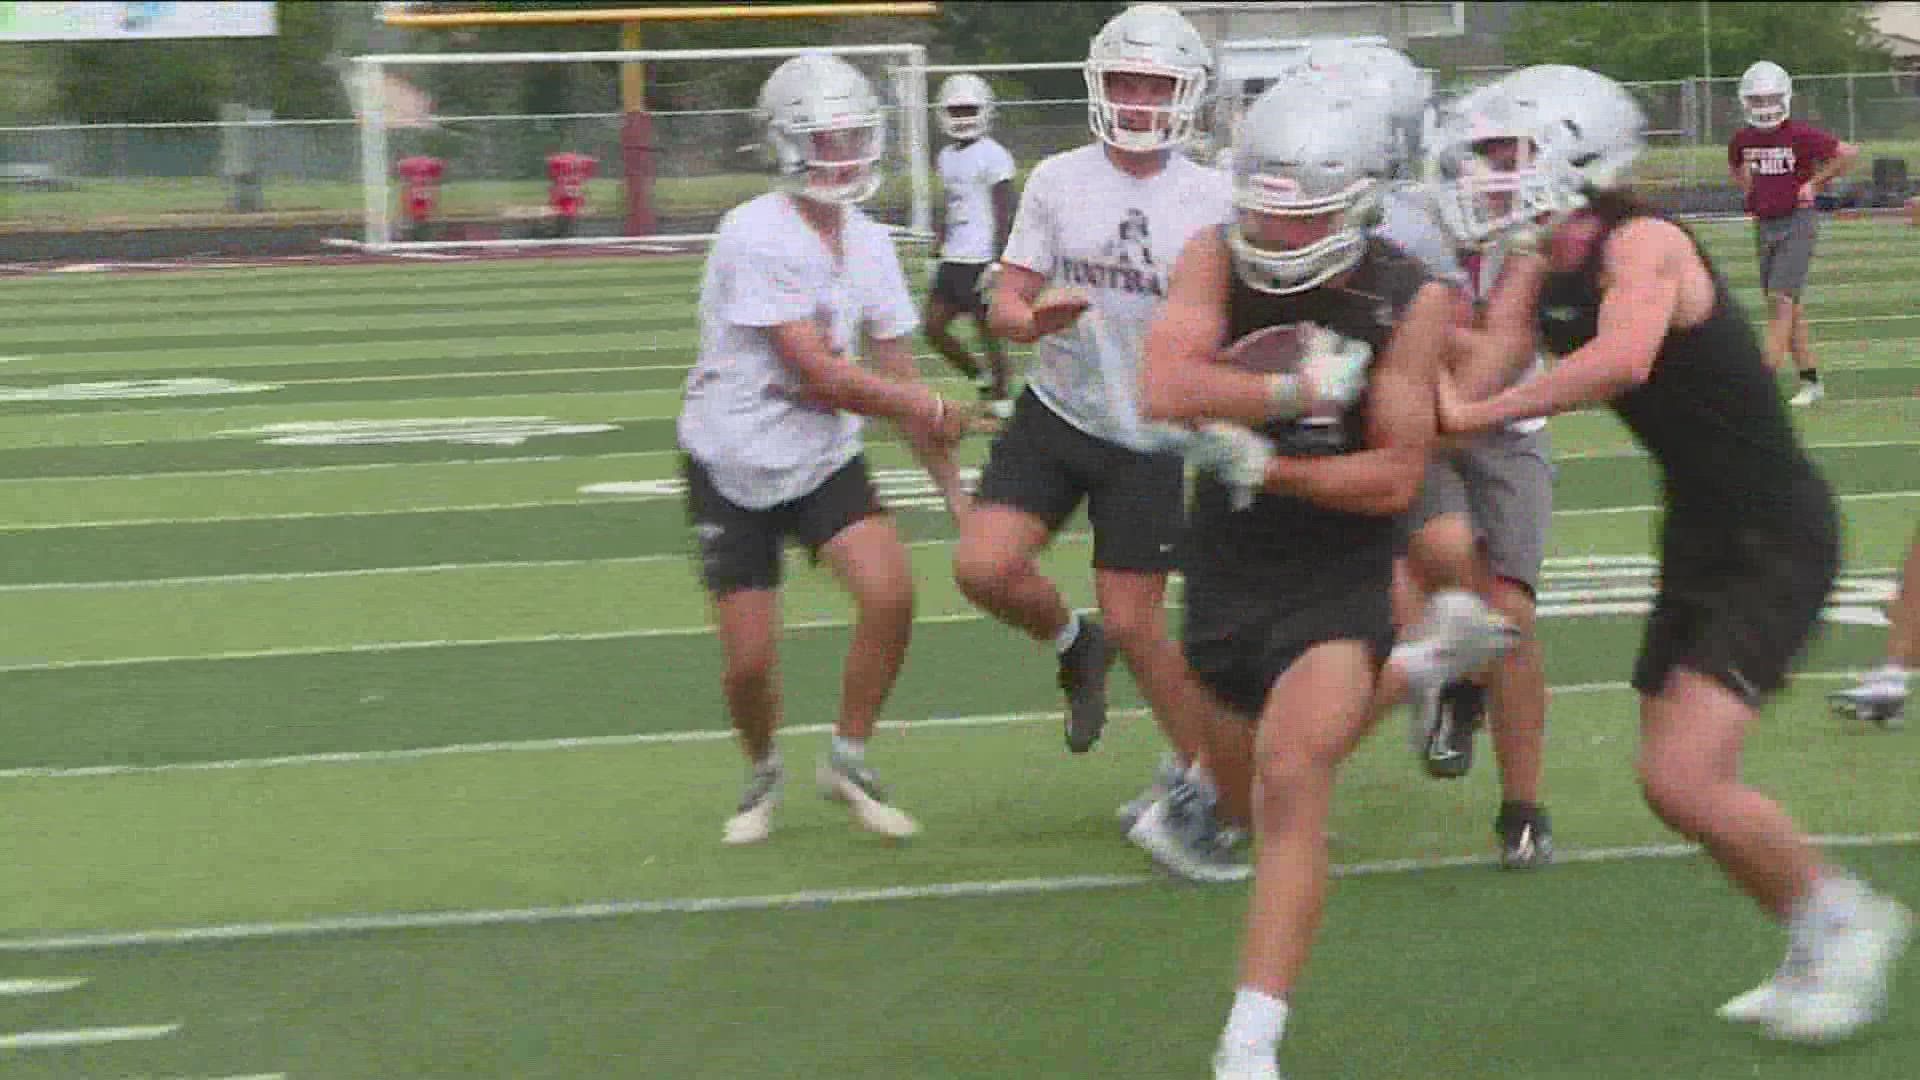 The Centennial Patriots have had a few down years, but they are confident this year they will turn it all around.